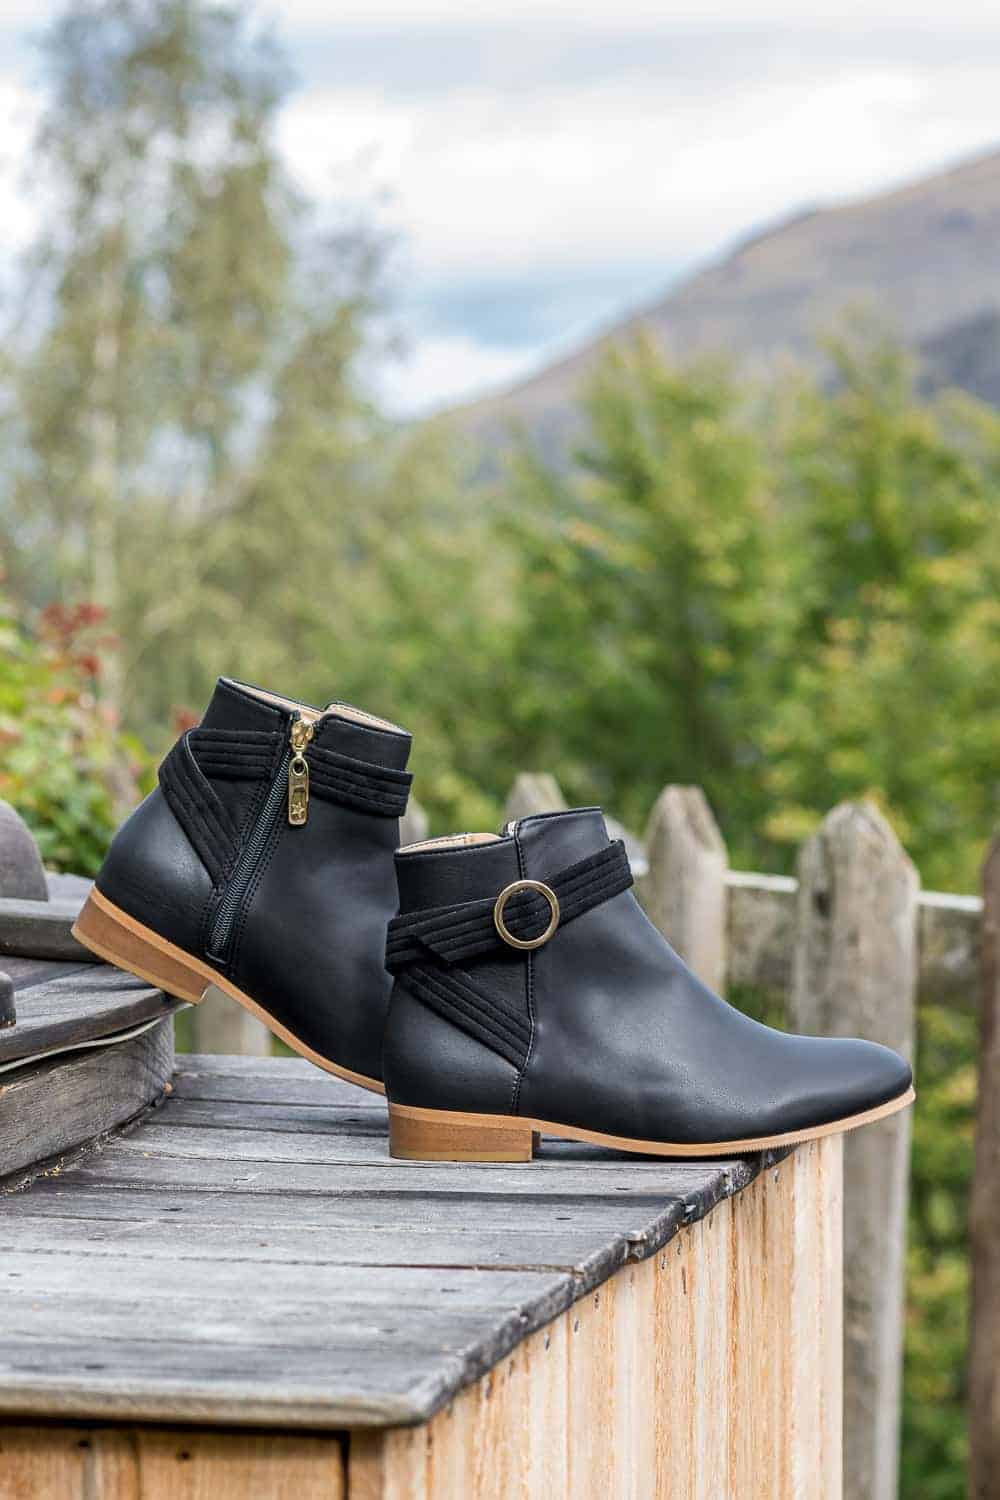 Black ankle boots with gold faux buckle detail and side zips from Minuit sur Terre